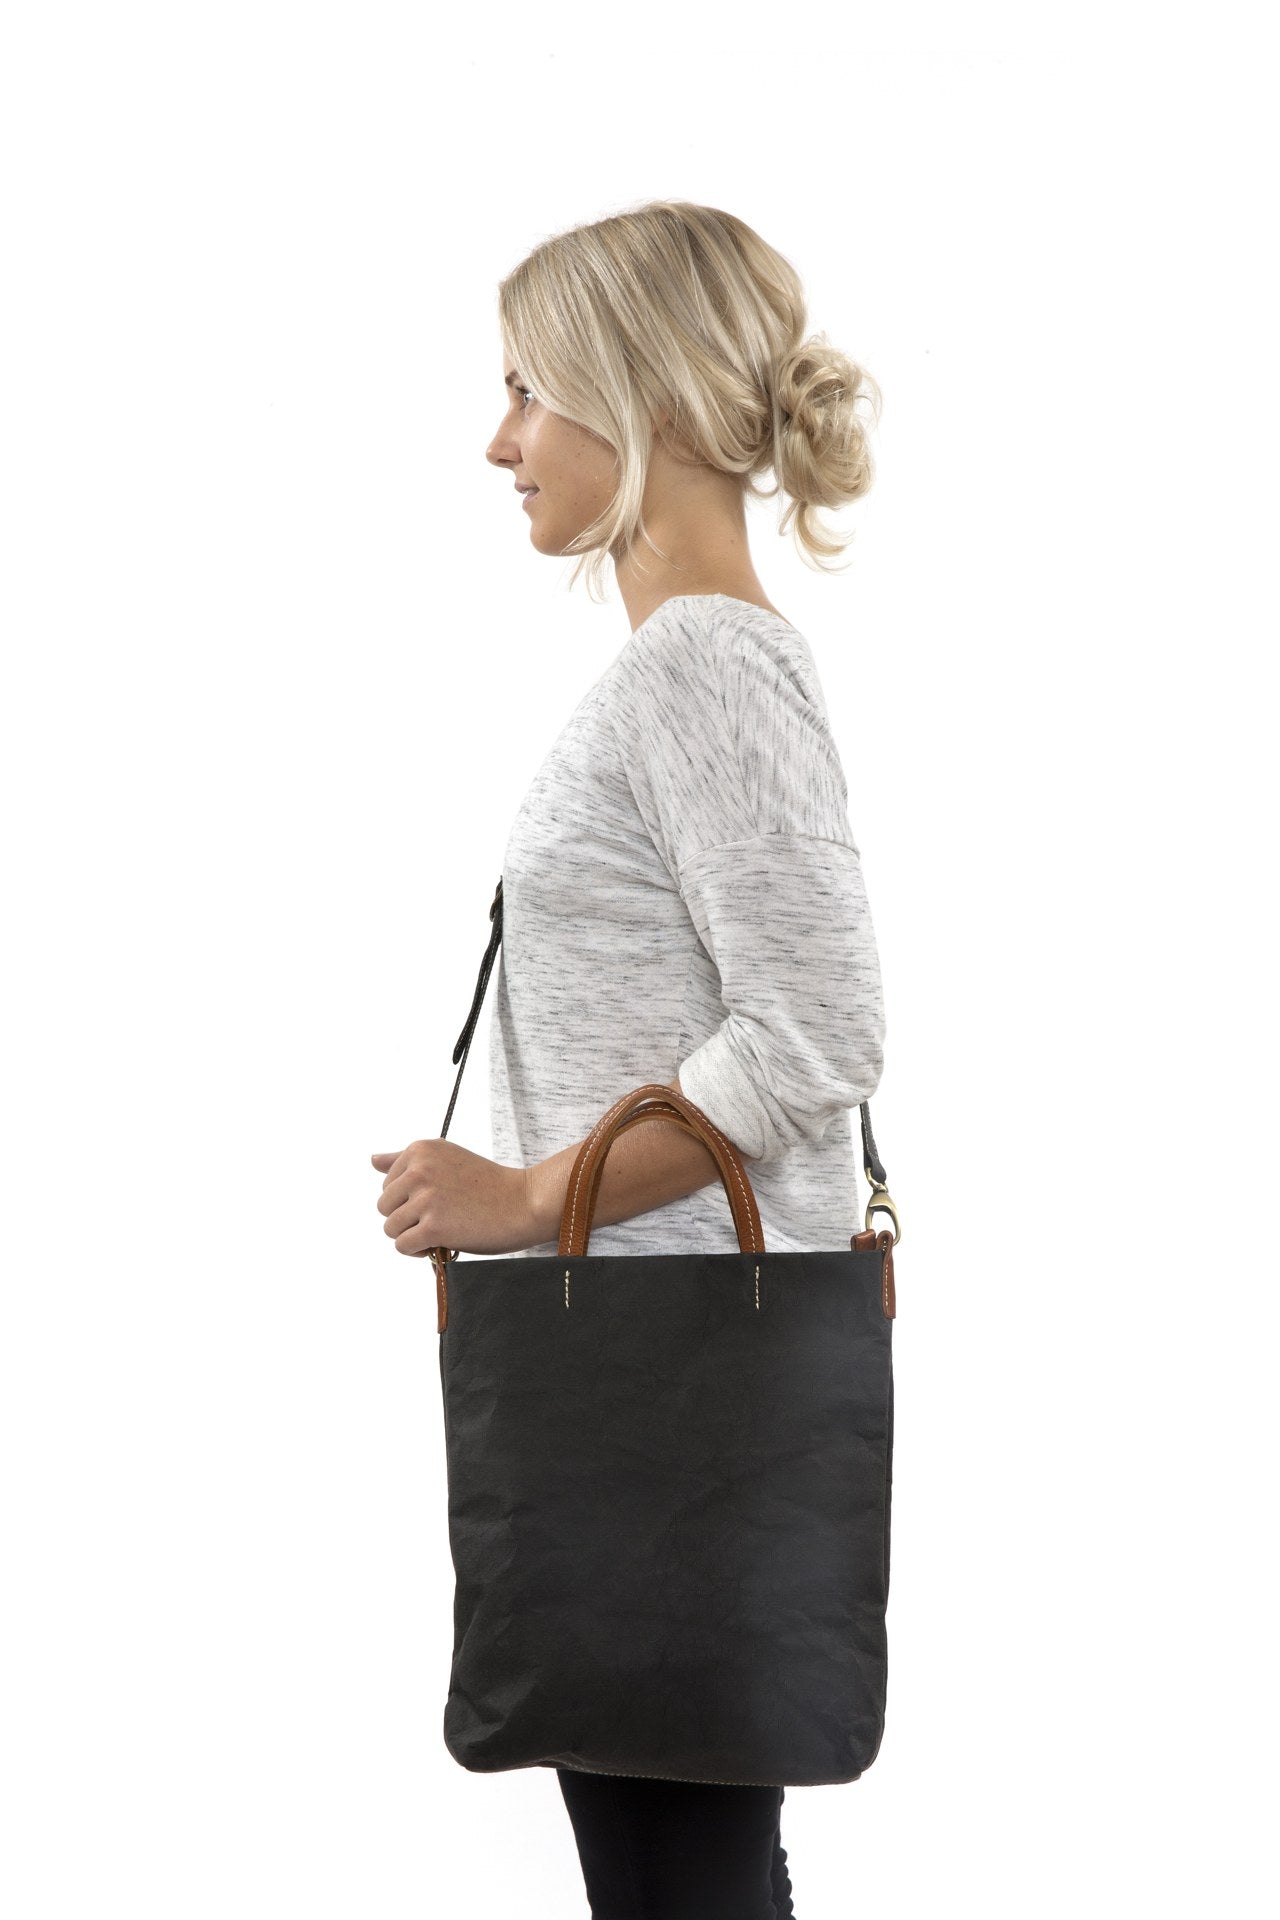 A blonde woman is shown from the side wearing casual clothing. She wears a crossbody washable paper tote bag with top handles. It is black in colour.